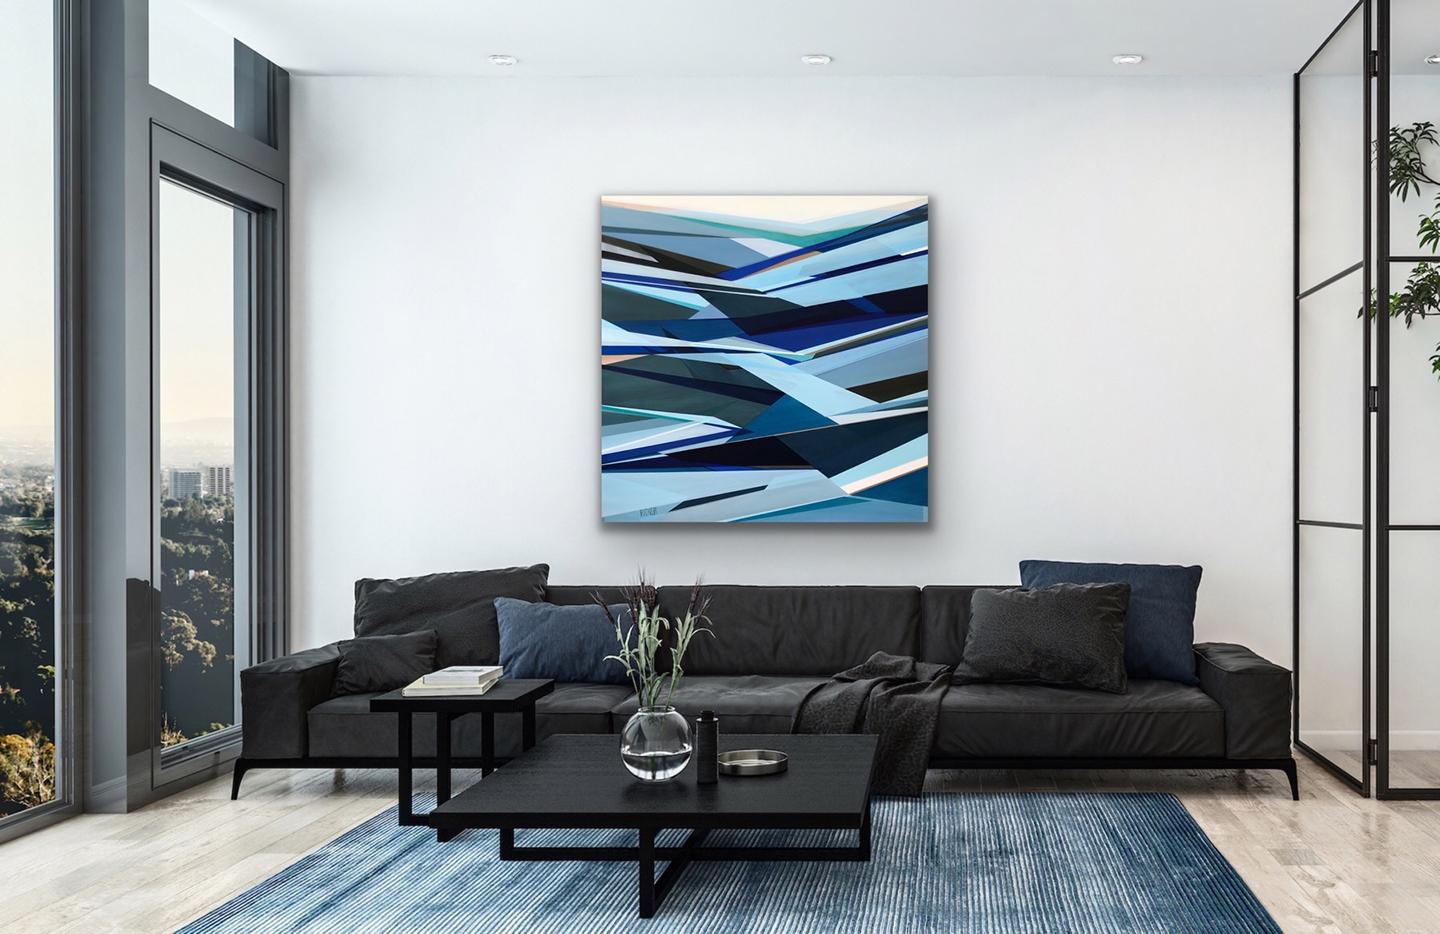 'Fathomless' Large contemporary abstract geometric painting - Blue Abstract Painting by Shilo Ratner